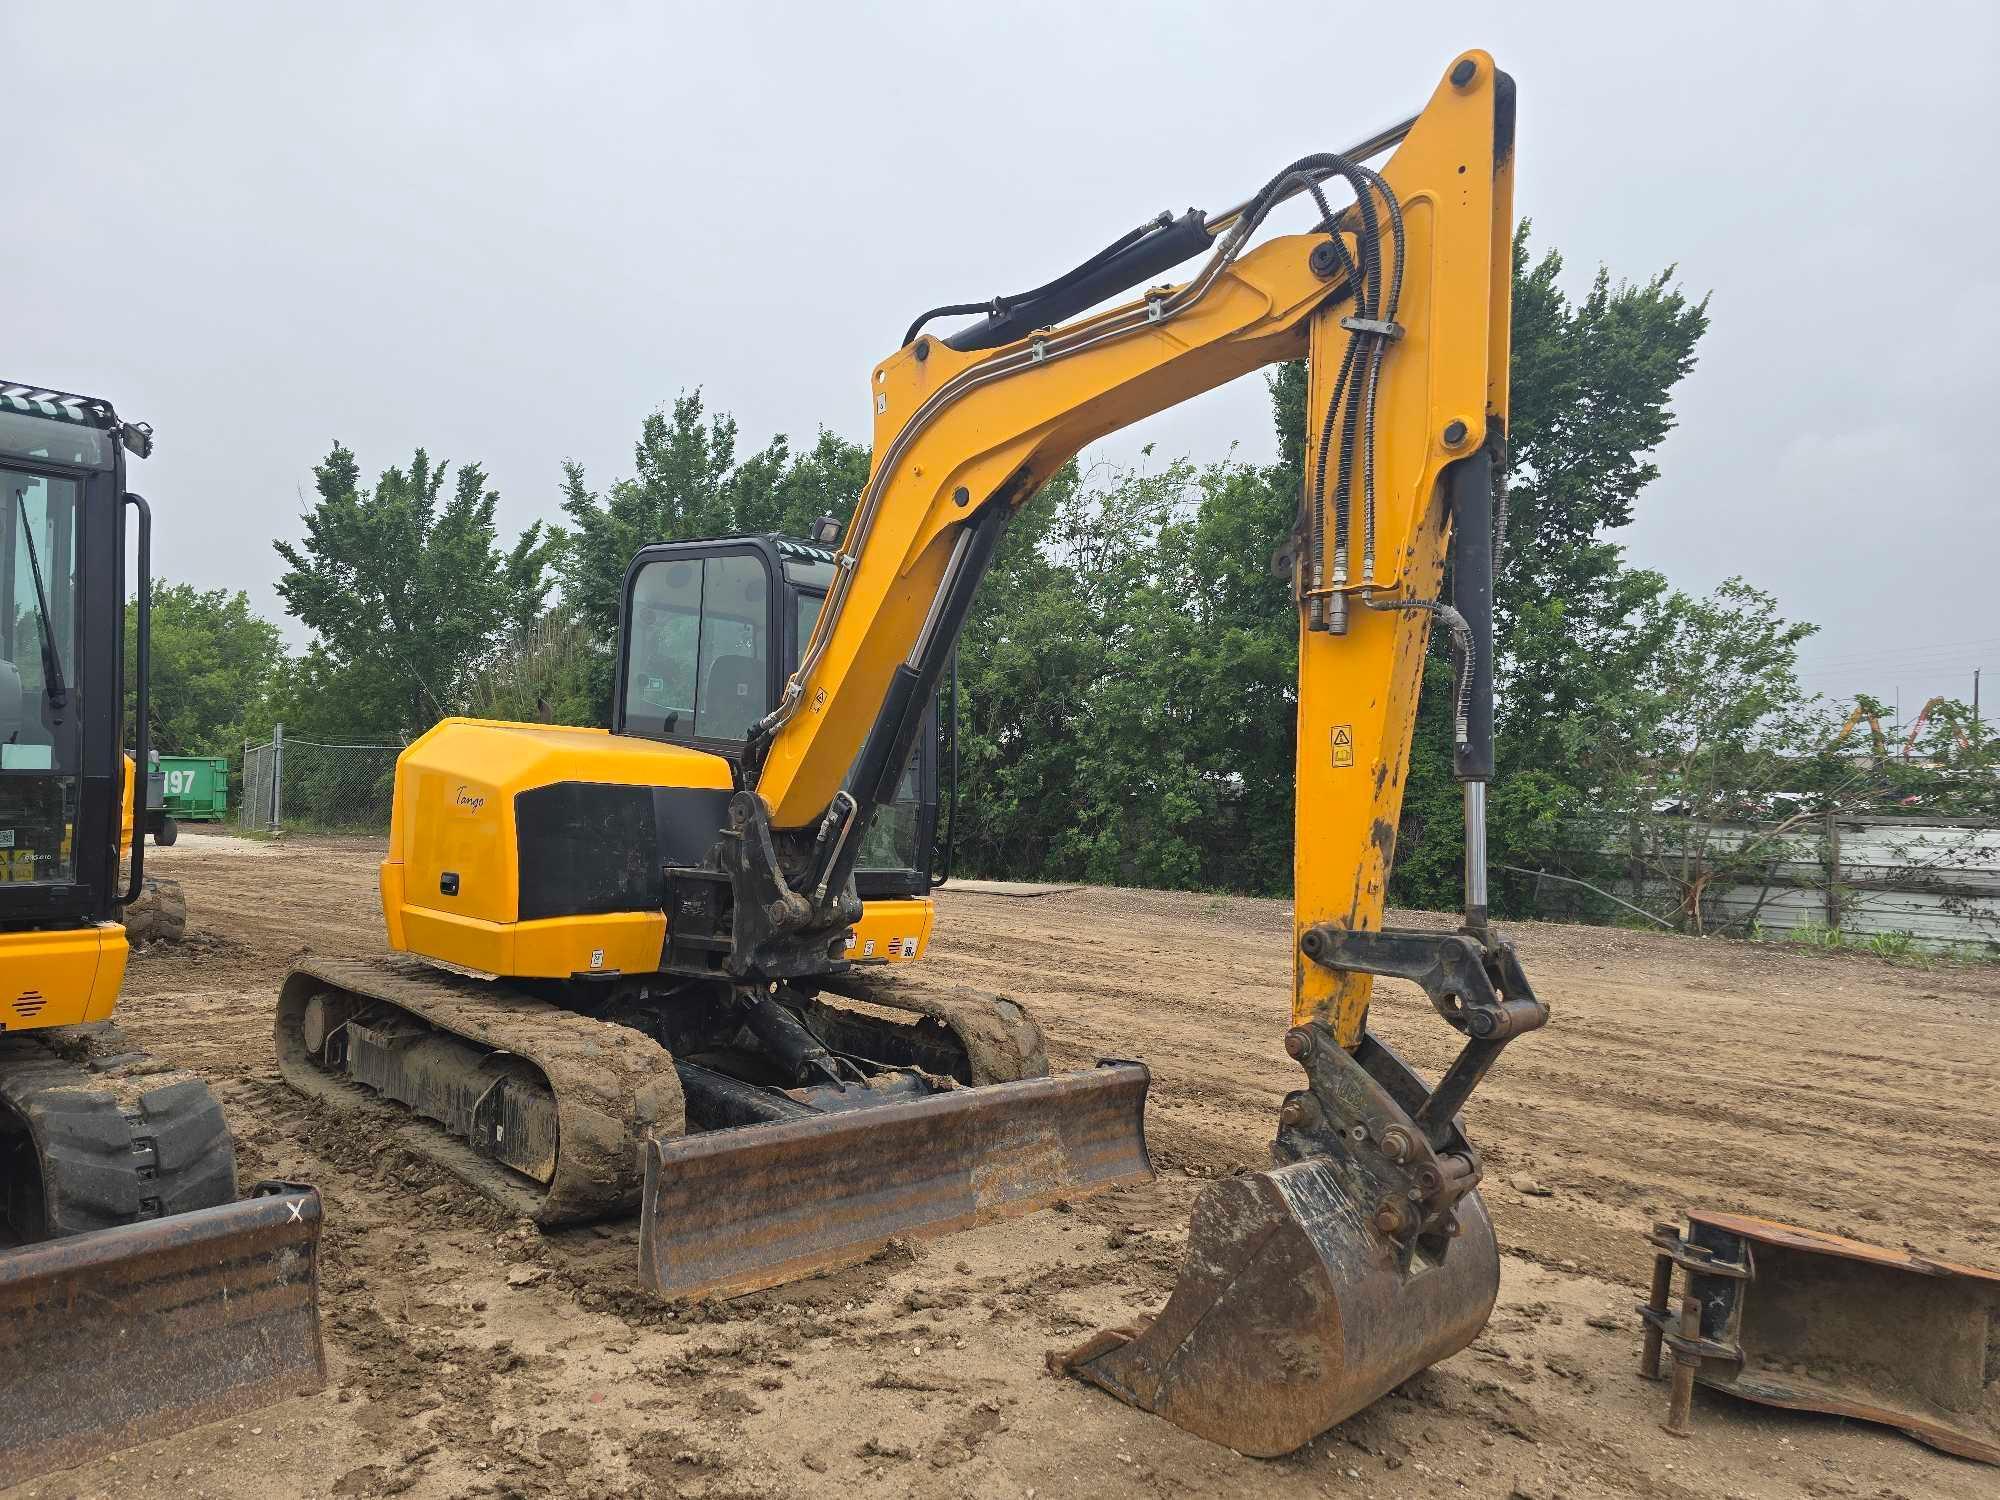 2021 JCB 85Z-2 HYDRAULIC EXCAVATOR SN:2972209 powered by Kohler diesel engine, equipped with Cab,